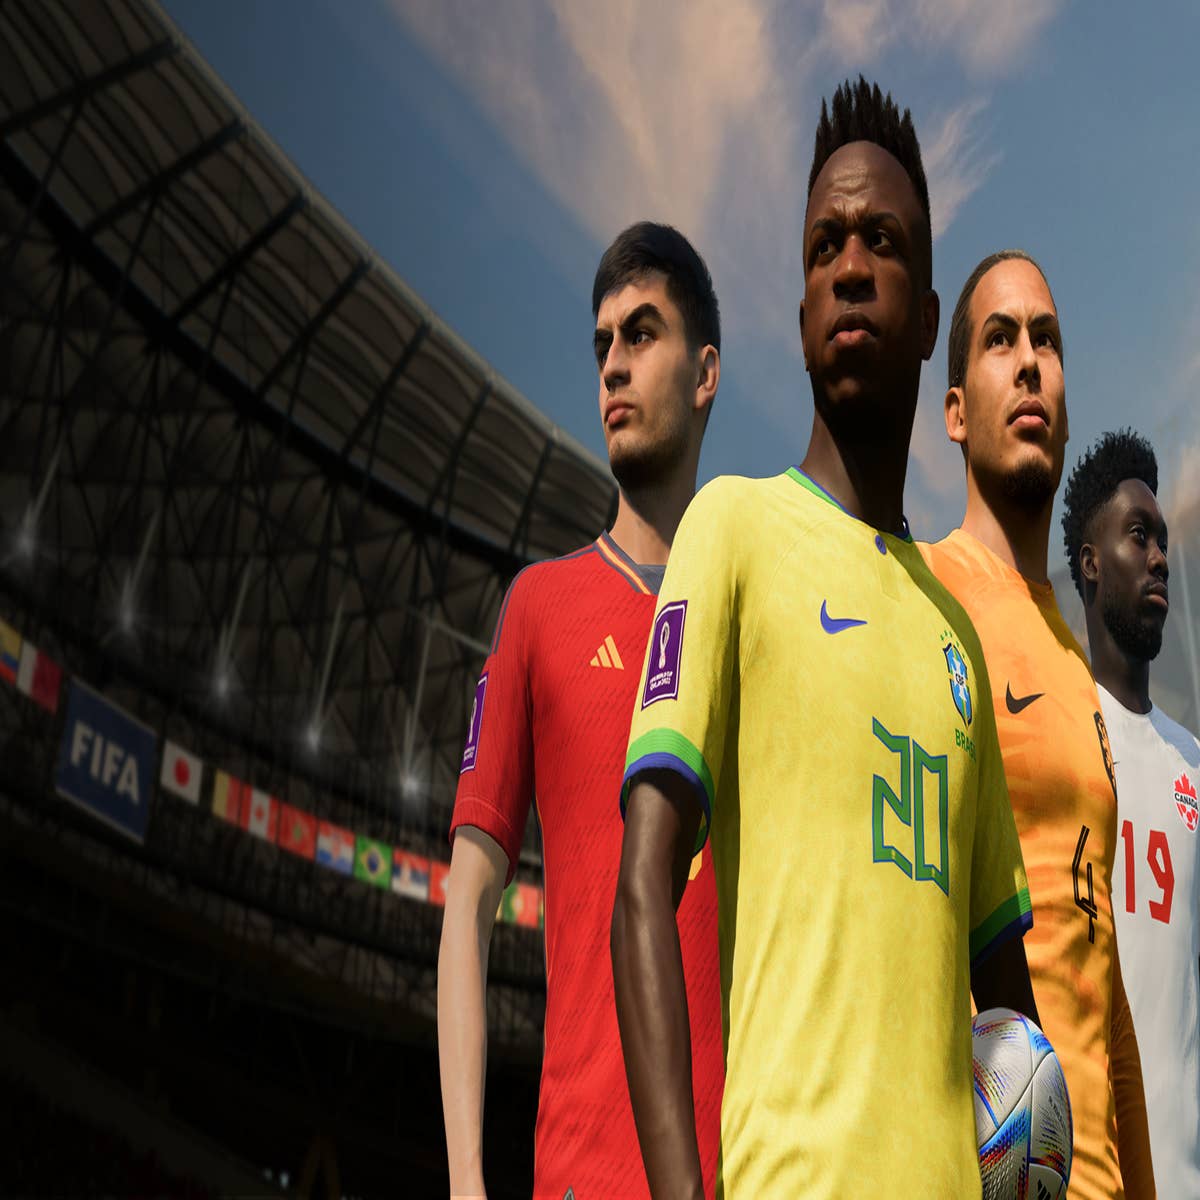 Best deals on FIFA 23 for PlayStation, Xbox, PC and Nintendo Switch